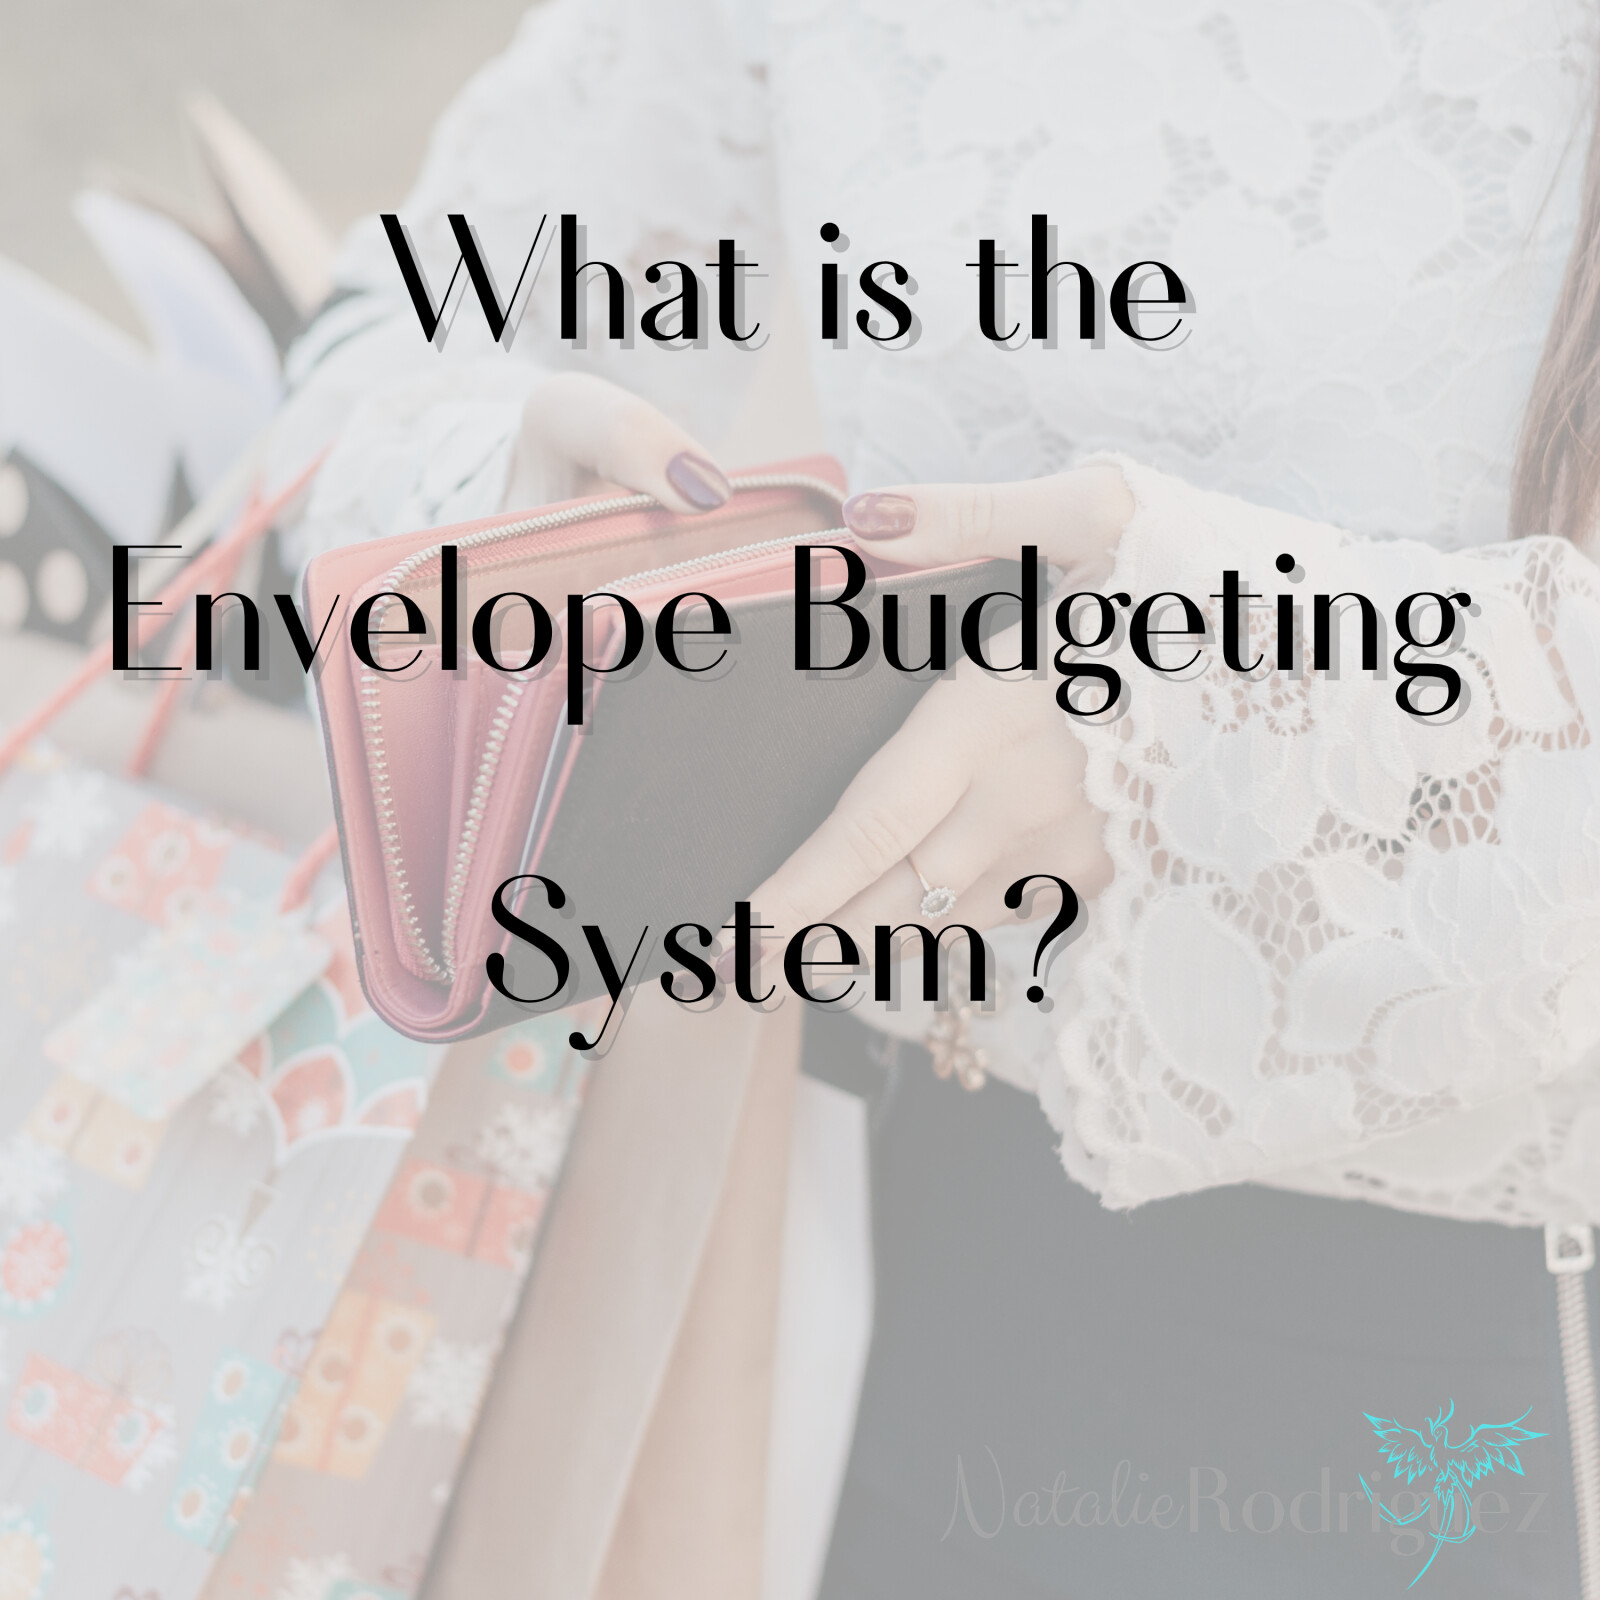 What is the Envelope Budgeting System?